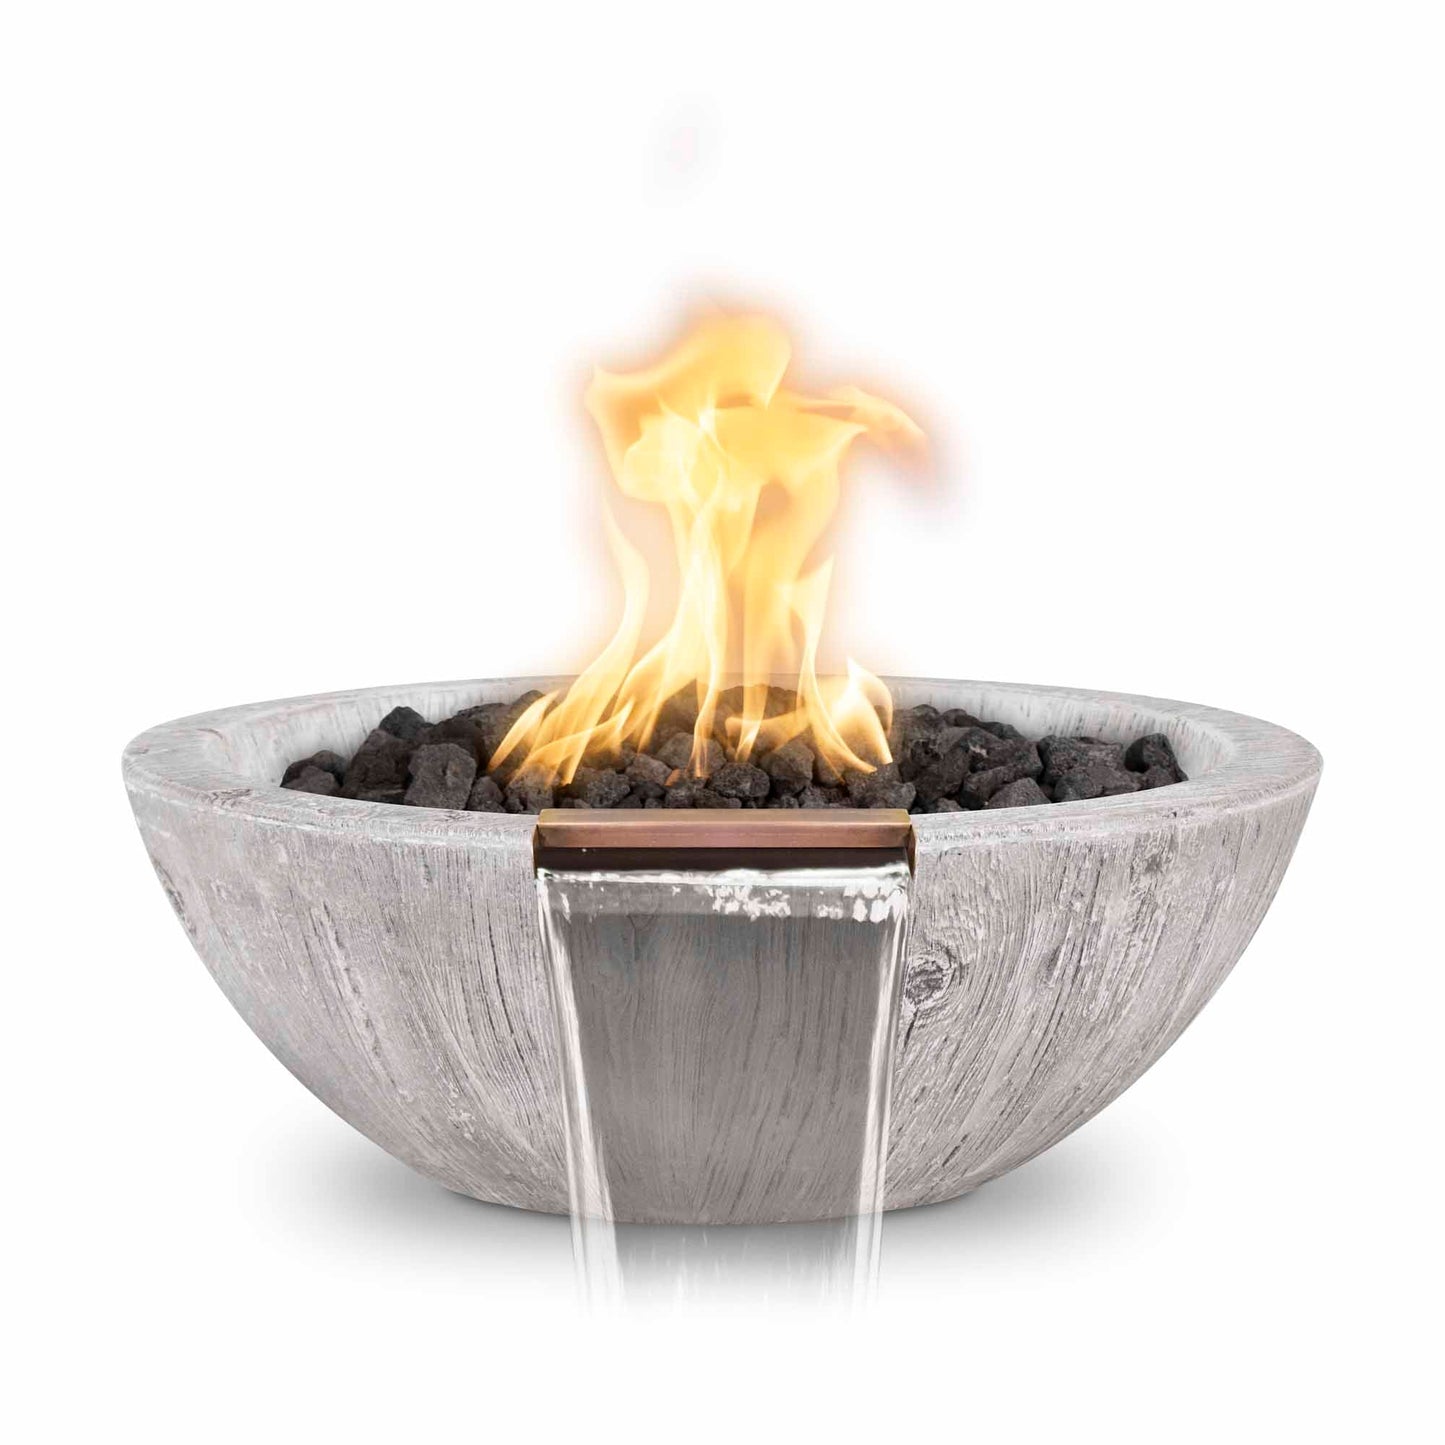 The Outdoor Plus Round Sedona 27" Ivory Wood Grain Natural Gas Fire & Water Bowl with Match Lit with Flame Sense Ignition